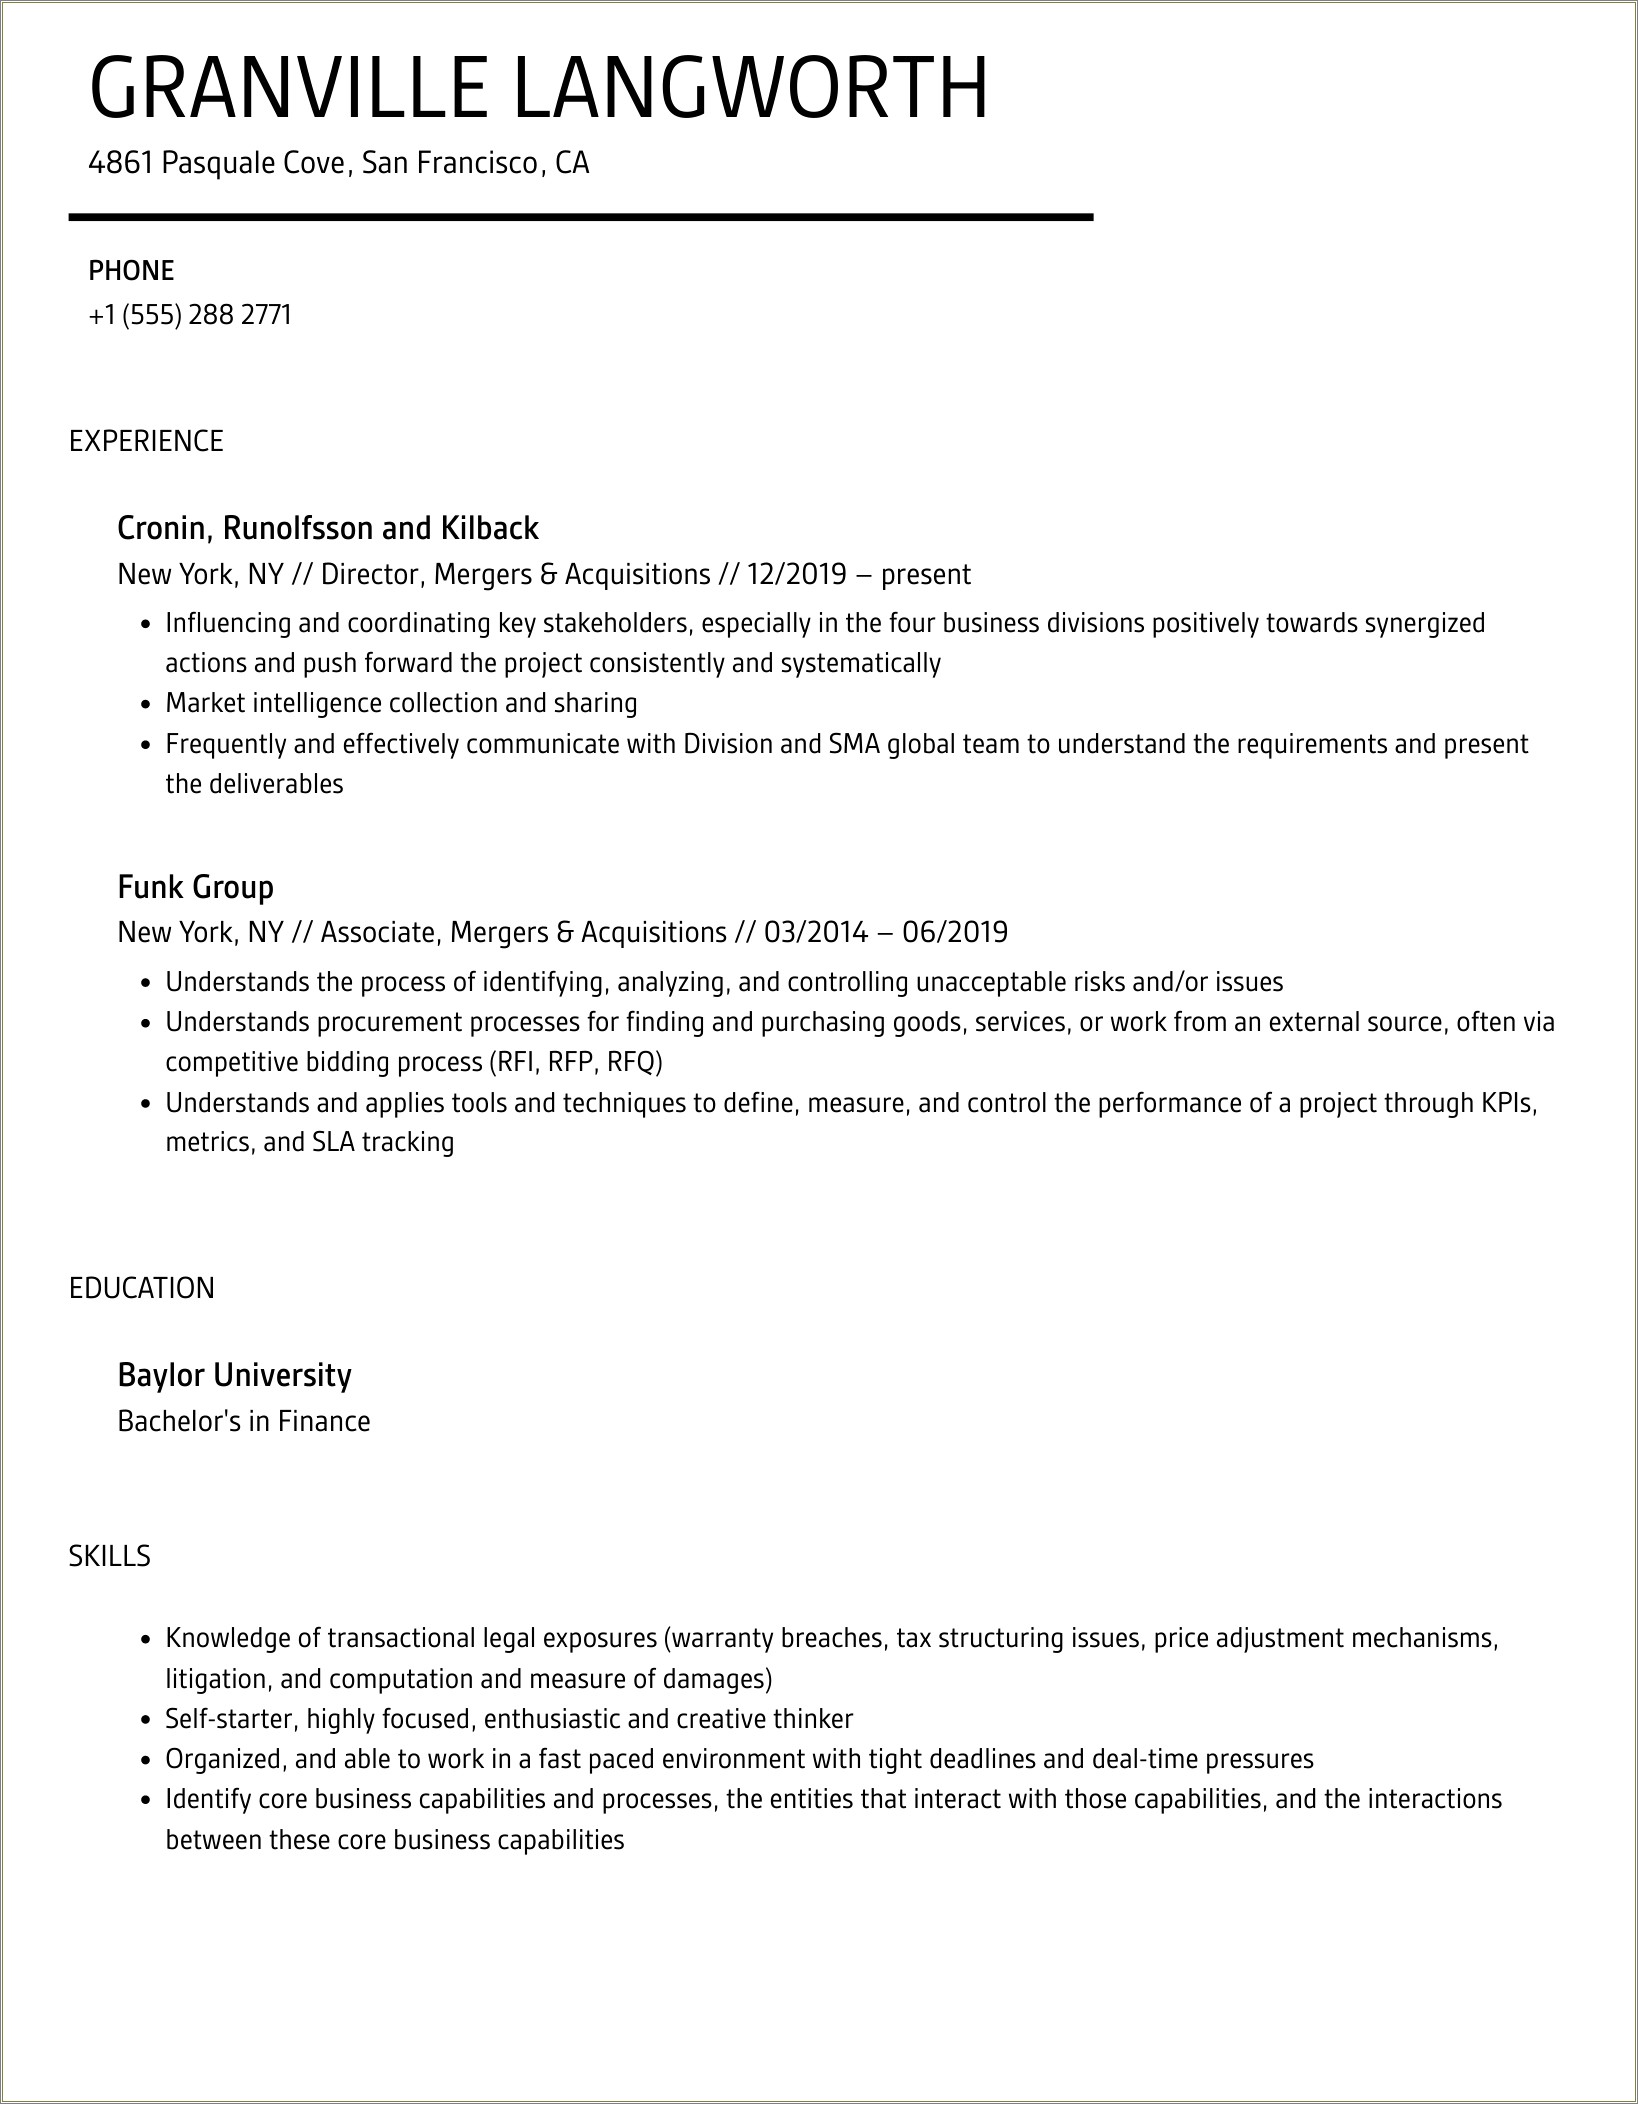 Sample Resume For Mergers And Acquisitions